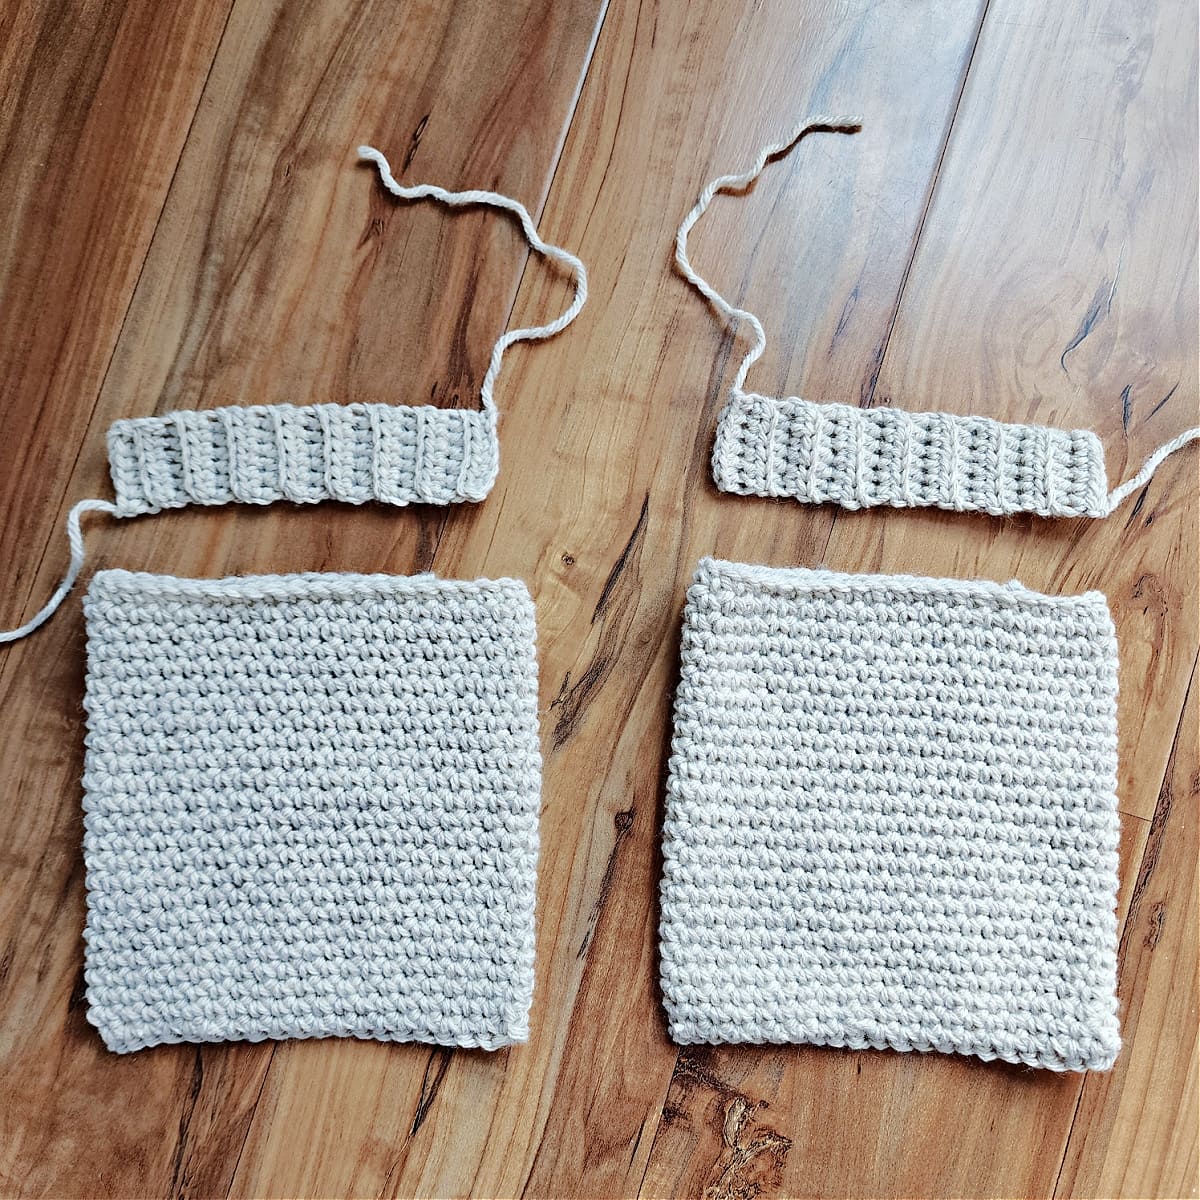 Crochet pocket pouches with ribbing for inset pockets.